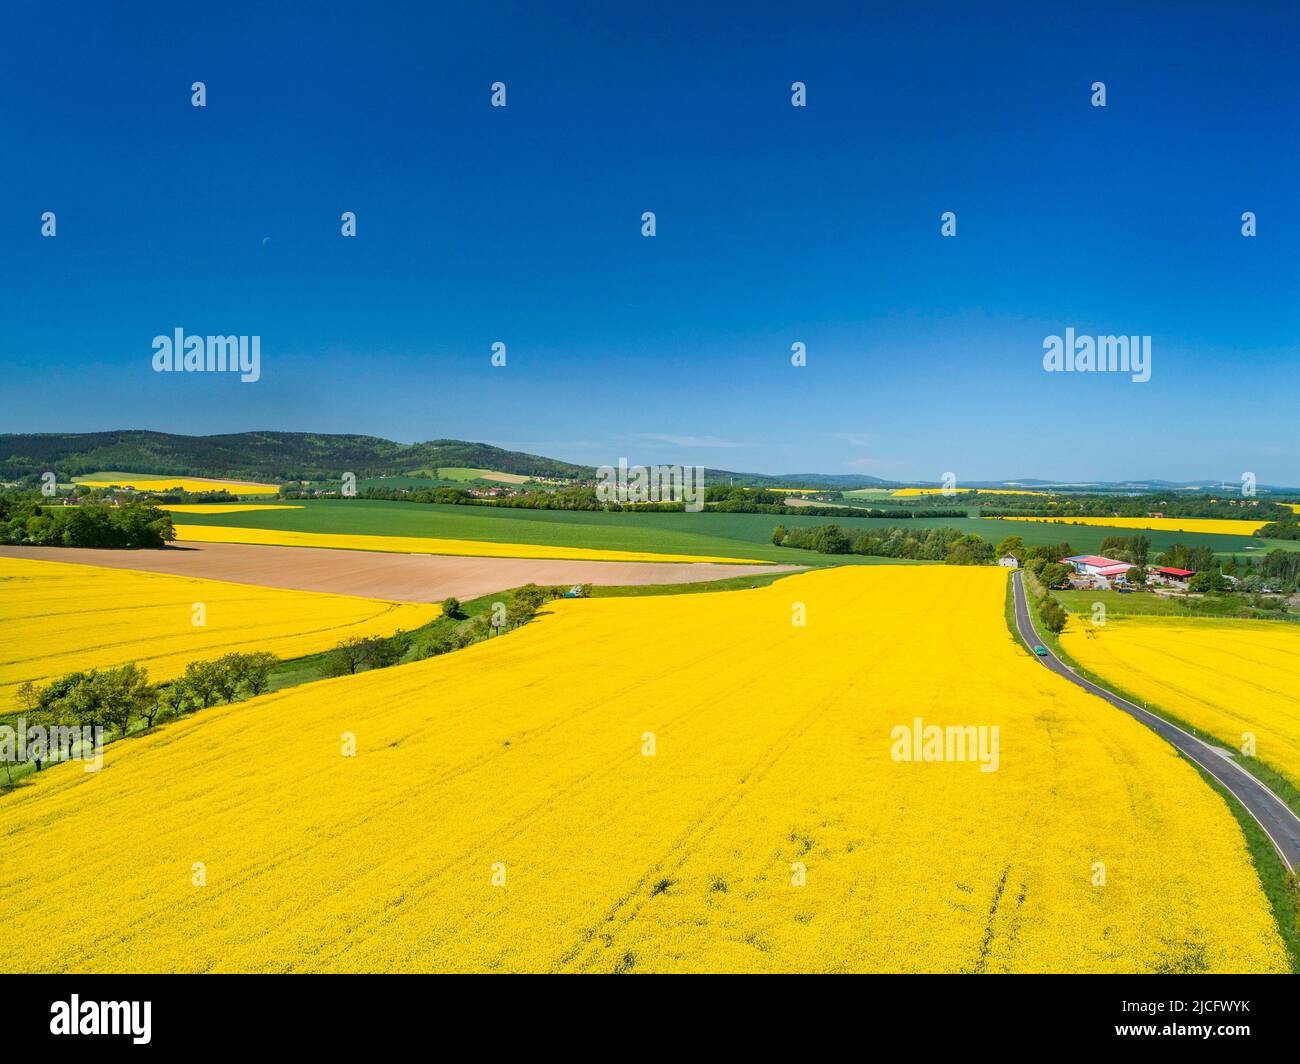 Landscape in Upper Lusatia: Rape fields in the run-up to the Lusatian highlands. The Lausitz area is the landscape between Kamenz in the west and the Königshain mountains in the east. Stock Photo